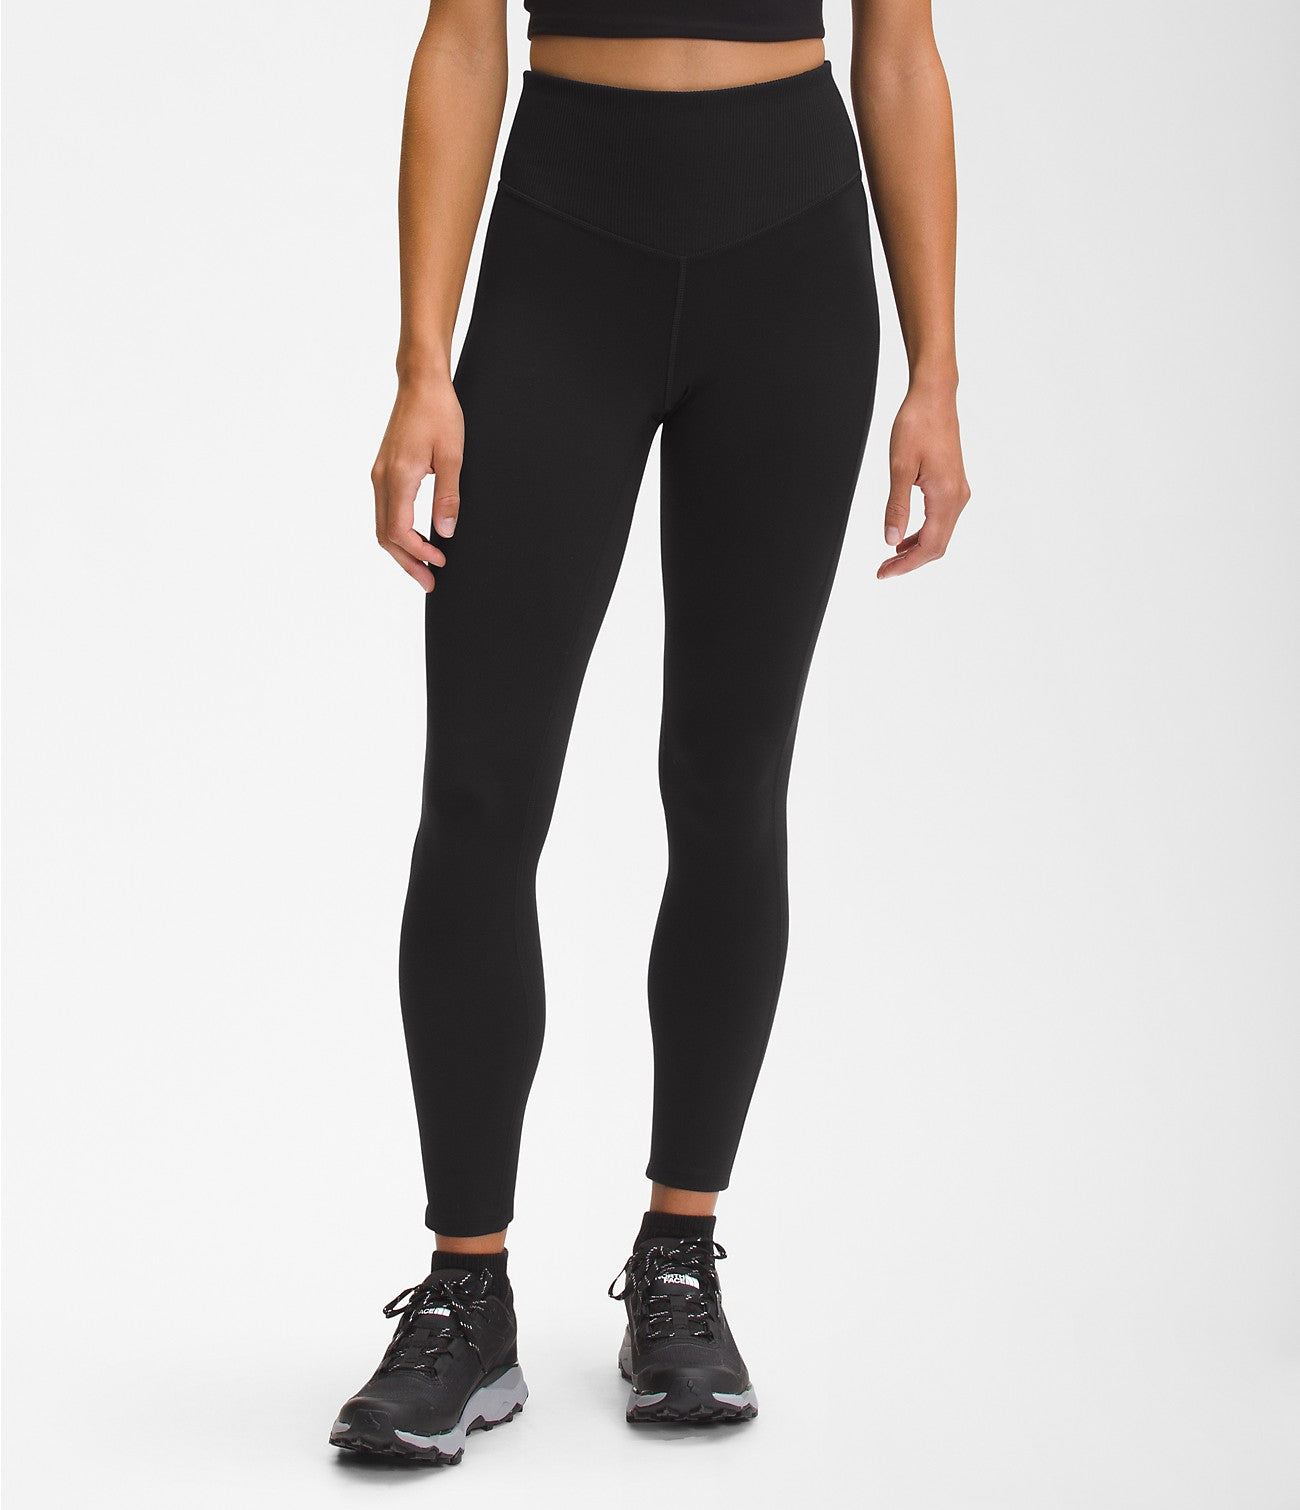 Women's Dune Sky Pocket Tight - Maine Sport Outfitters